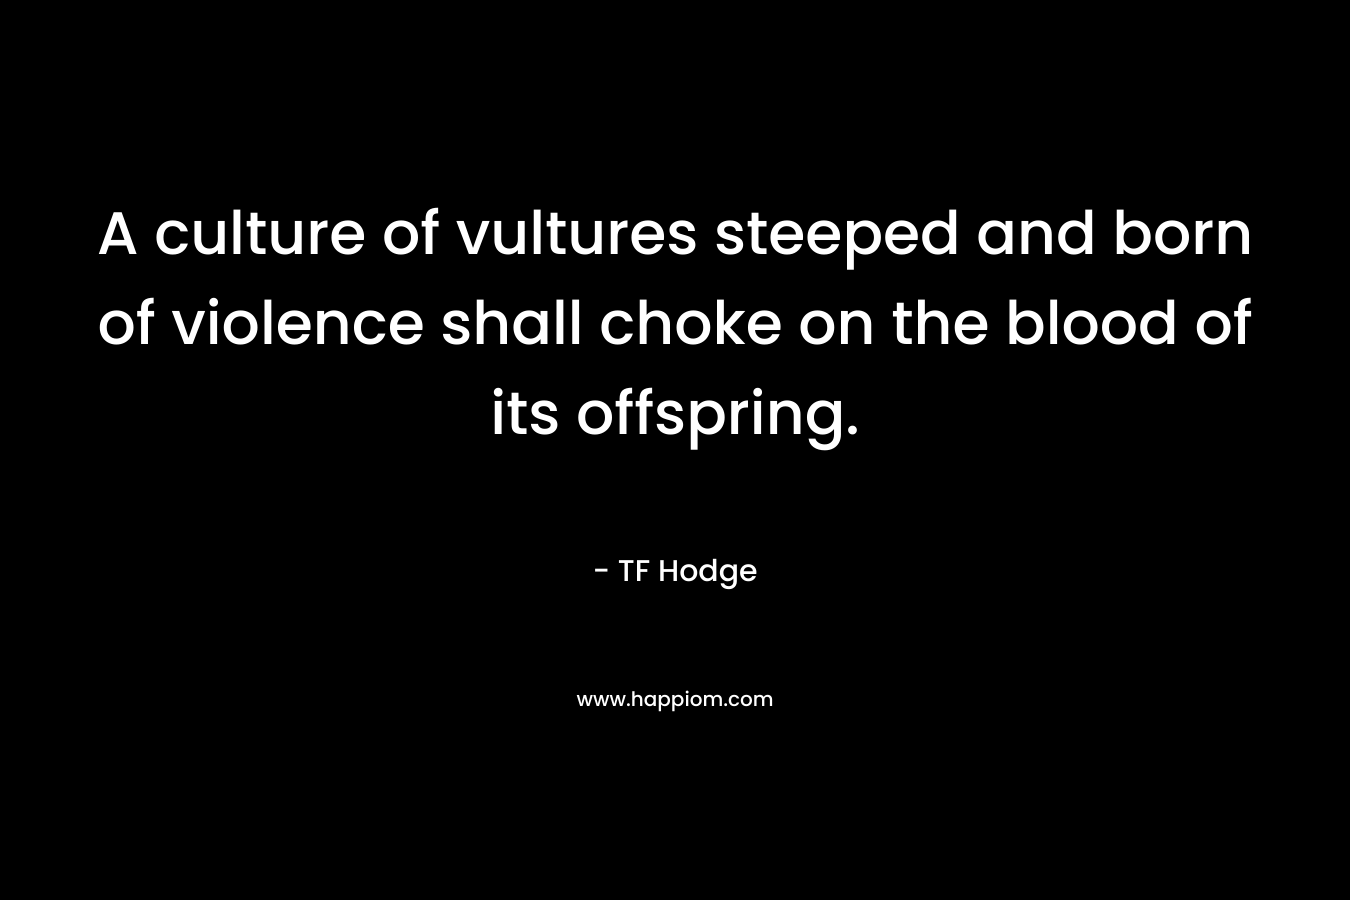 A culture of vultures steeped and born of violence shall choke on the blood of its offspring.